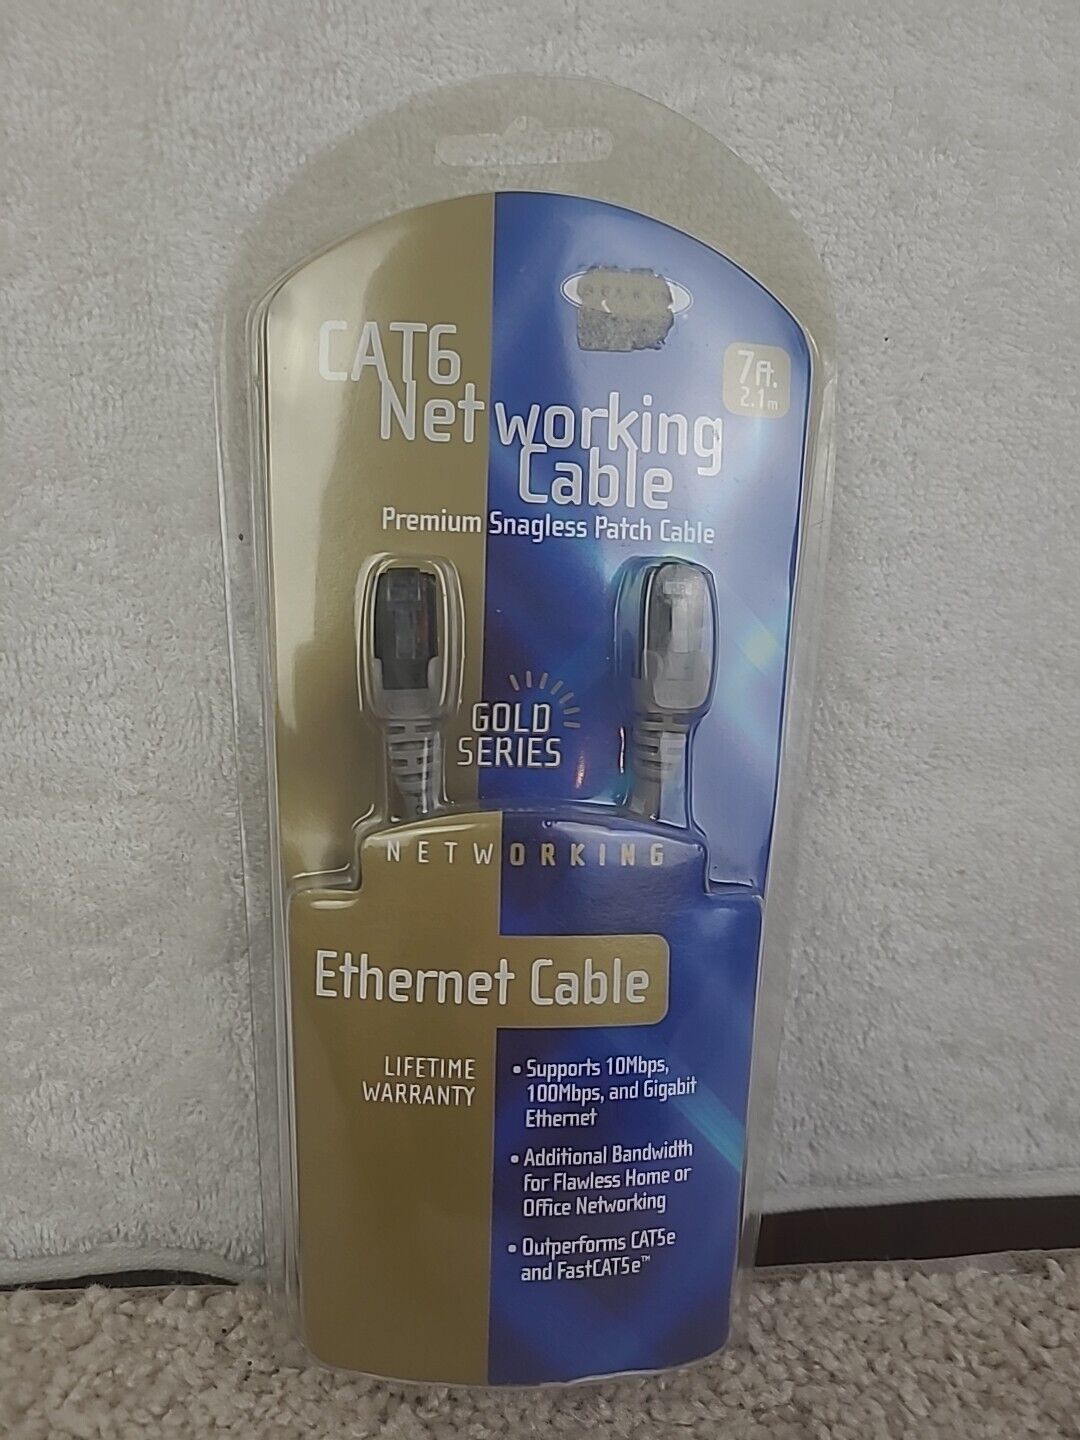 Belkin CAT6 Networking Cable 7 Feet 10 MBPS New